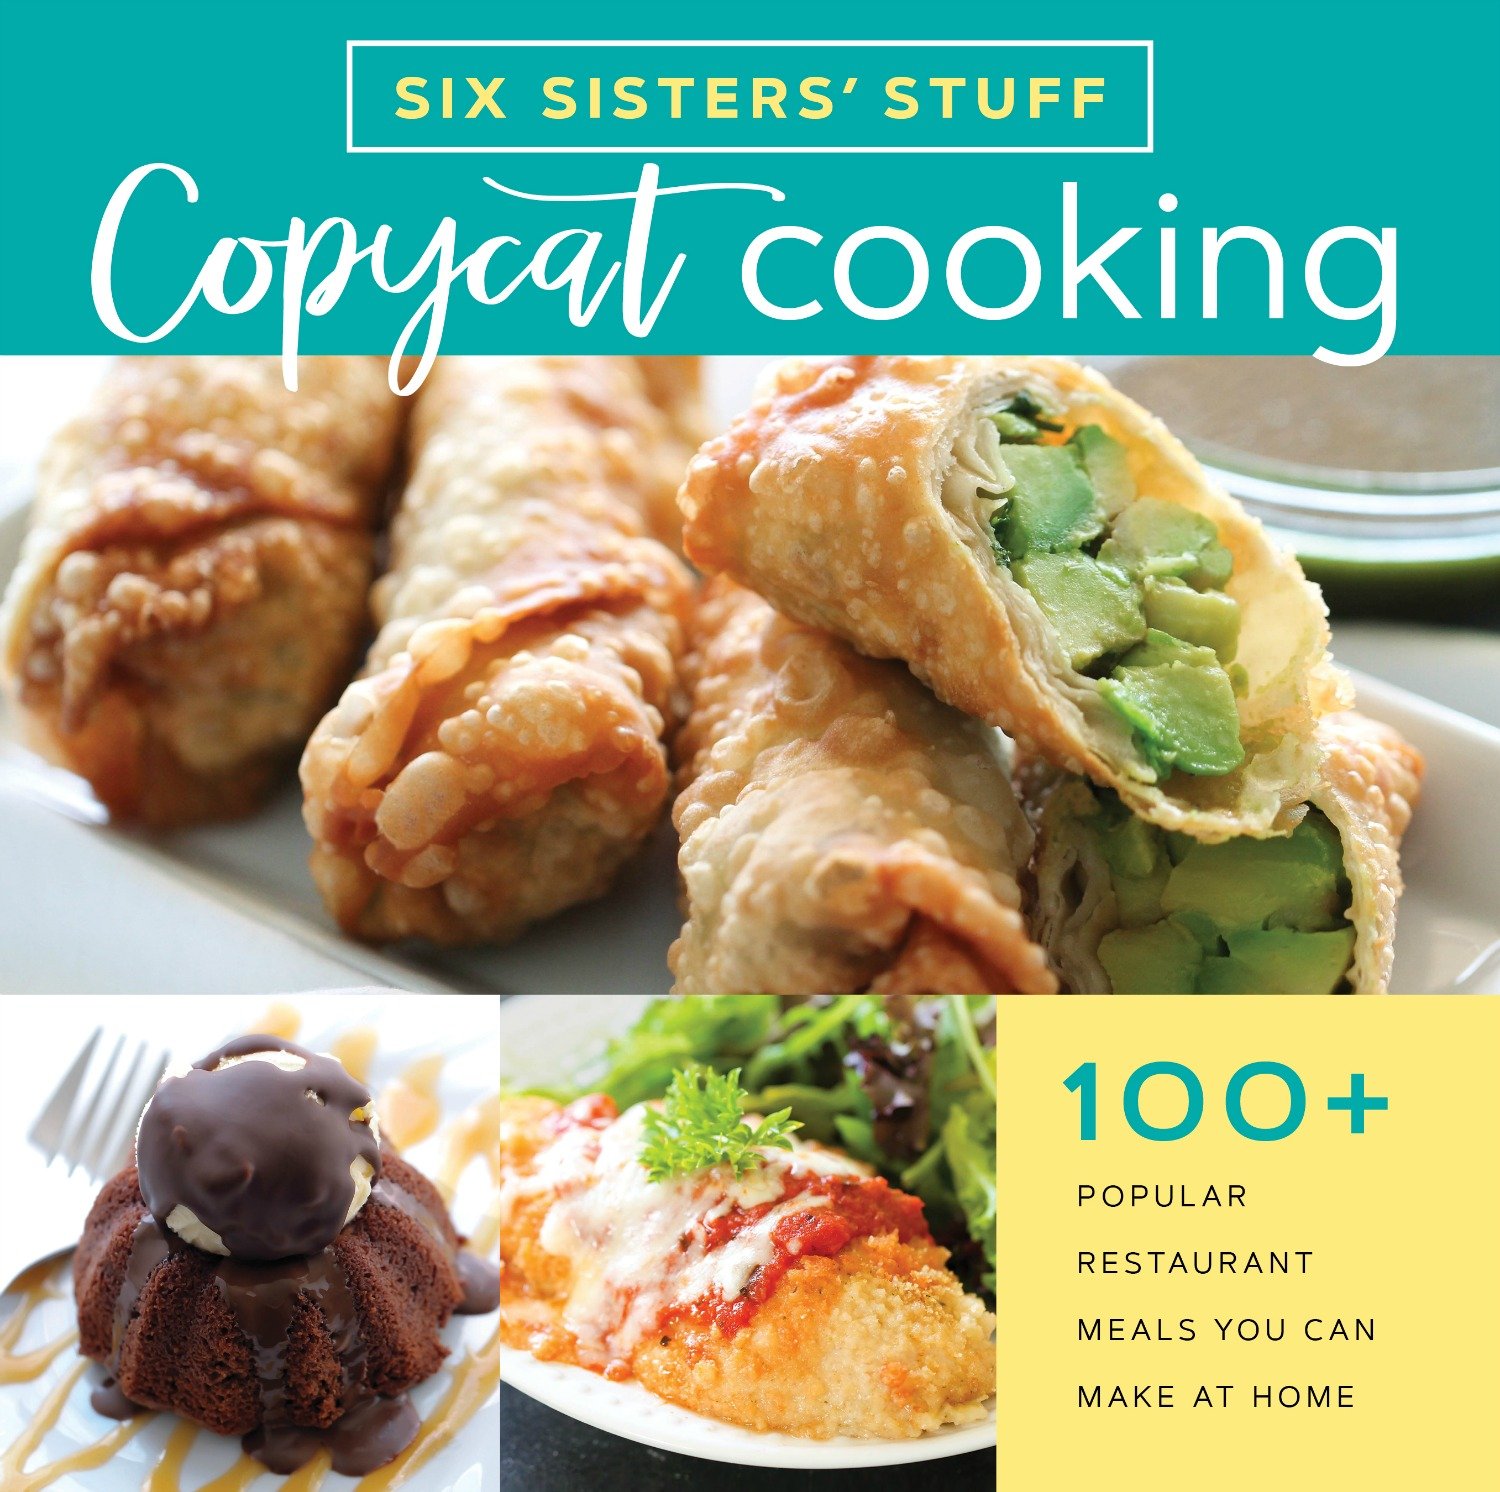 Copycat Cooking Cook Book from Six Sisters' Stuff